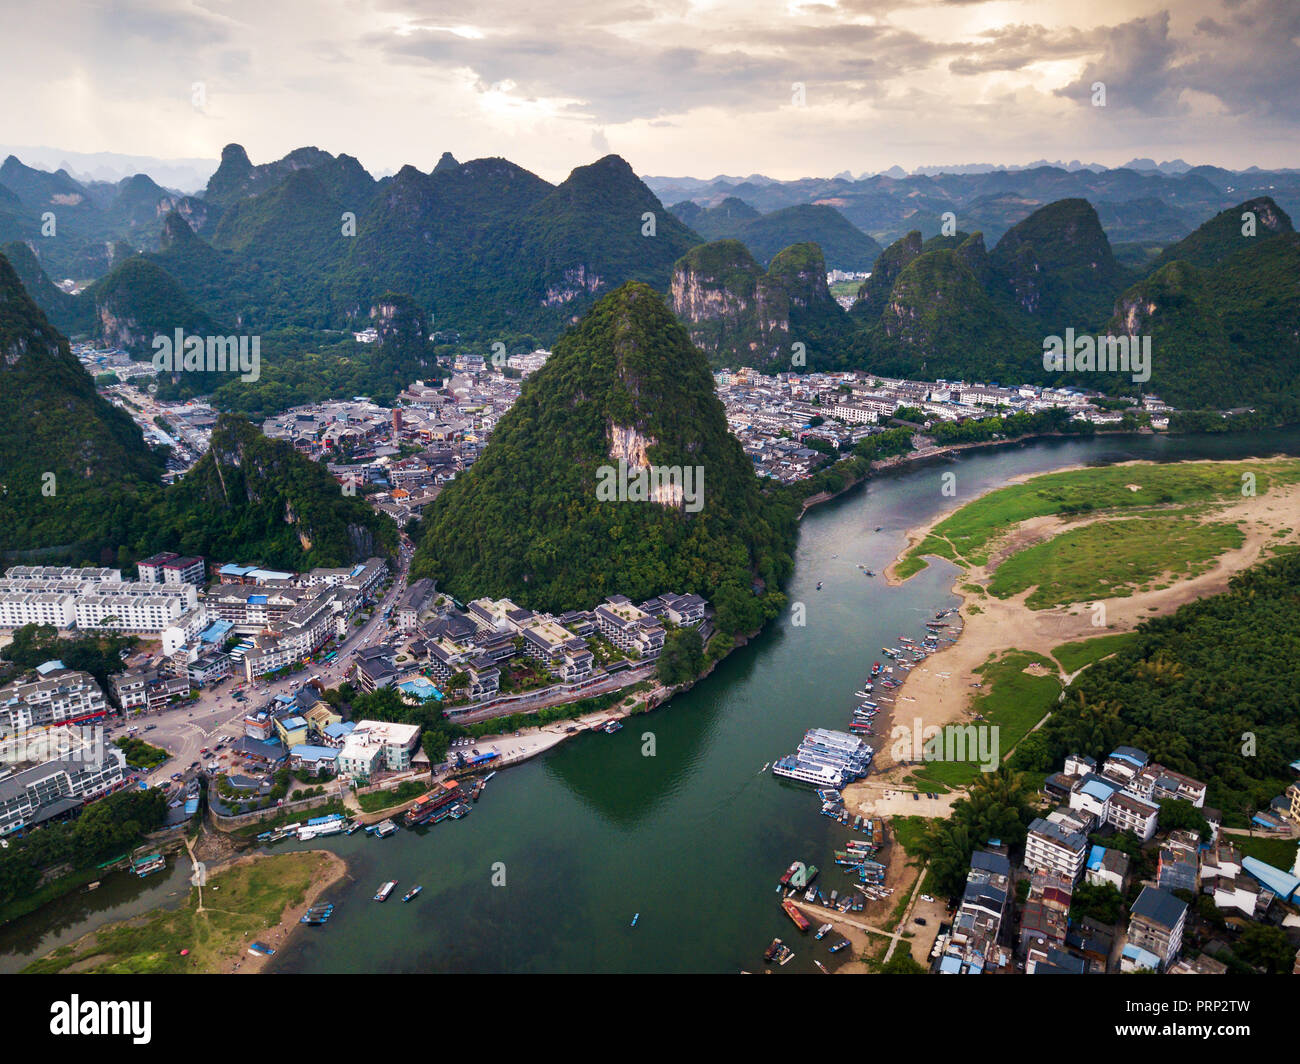 Yangshuo county and Li river in Guilin, China aerial view Stock Photo